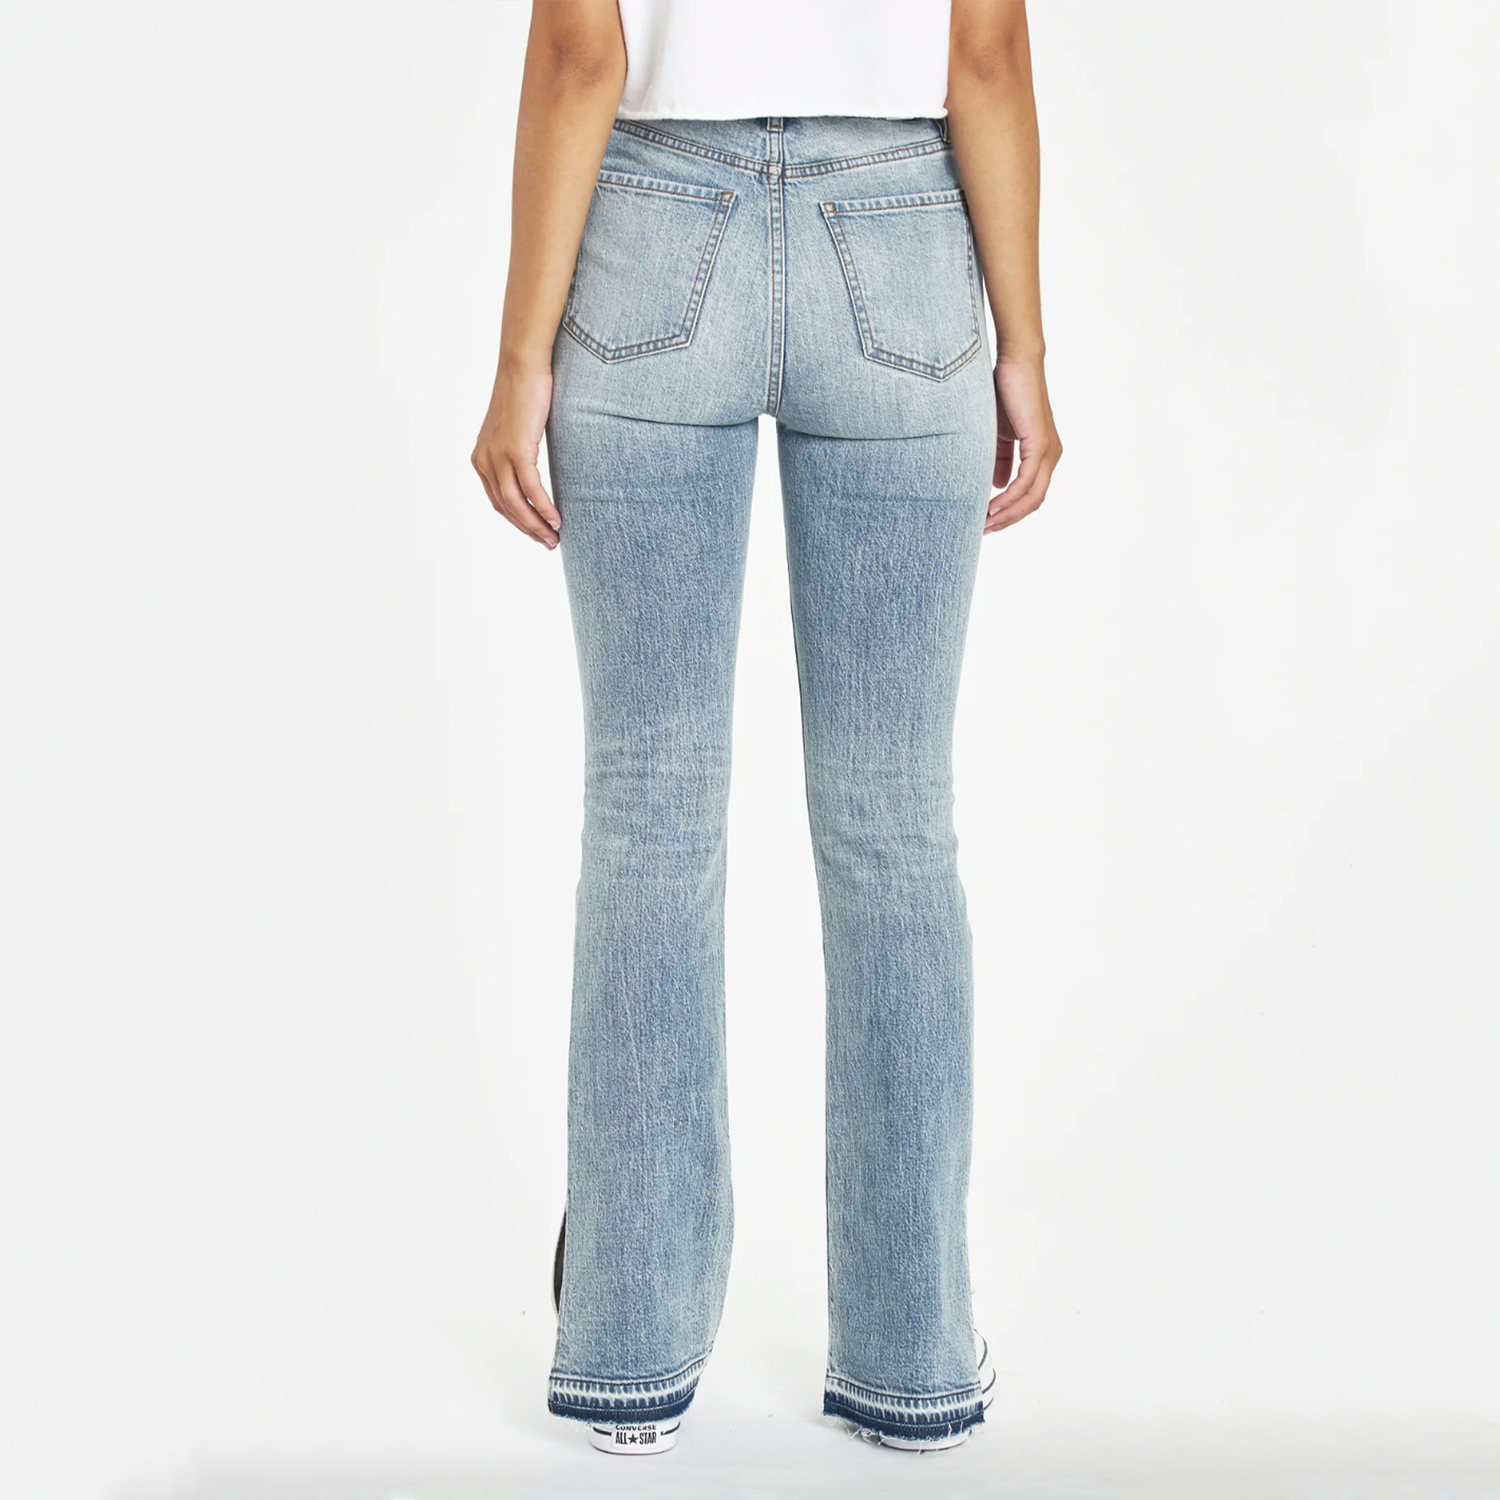 Daze Go-Getter Slim High Rise Flare With Side Slit Jean. The Go-getter in Double Dare is made to look like an authentic vintage pant. It's mostly rigid but yields to your body in all the right ways where you need it to